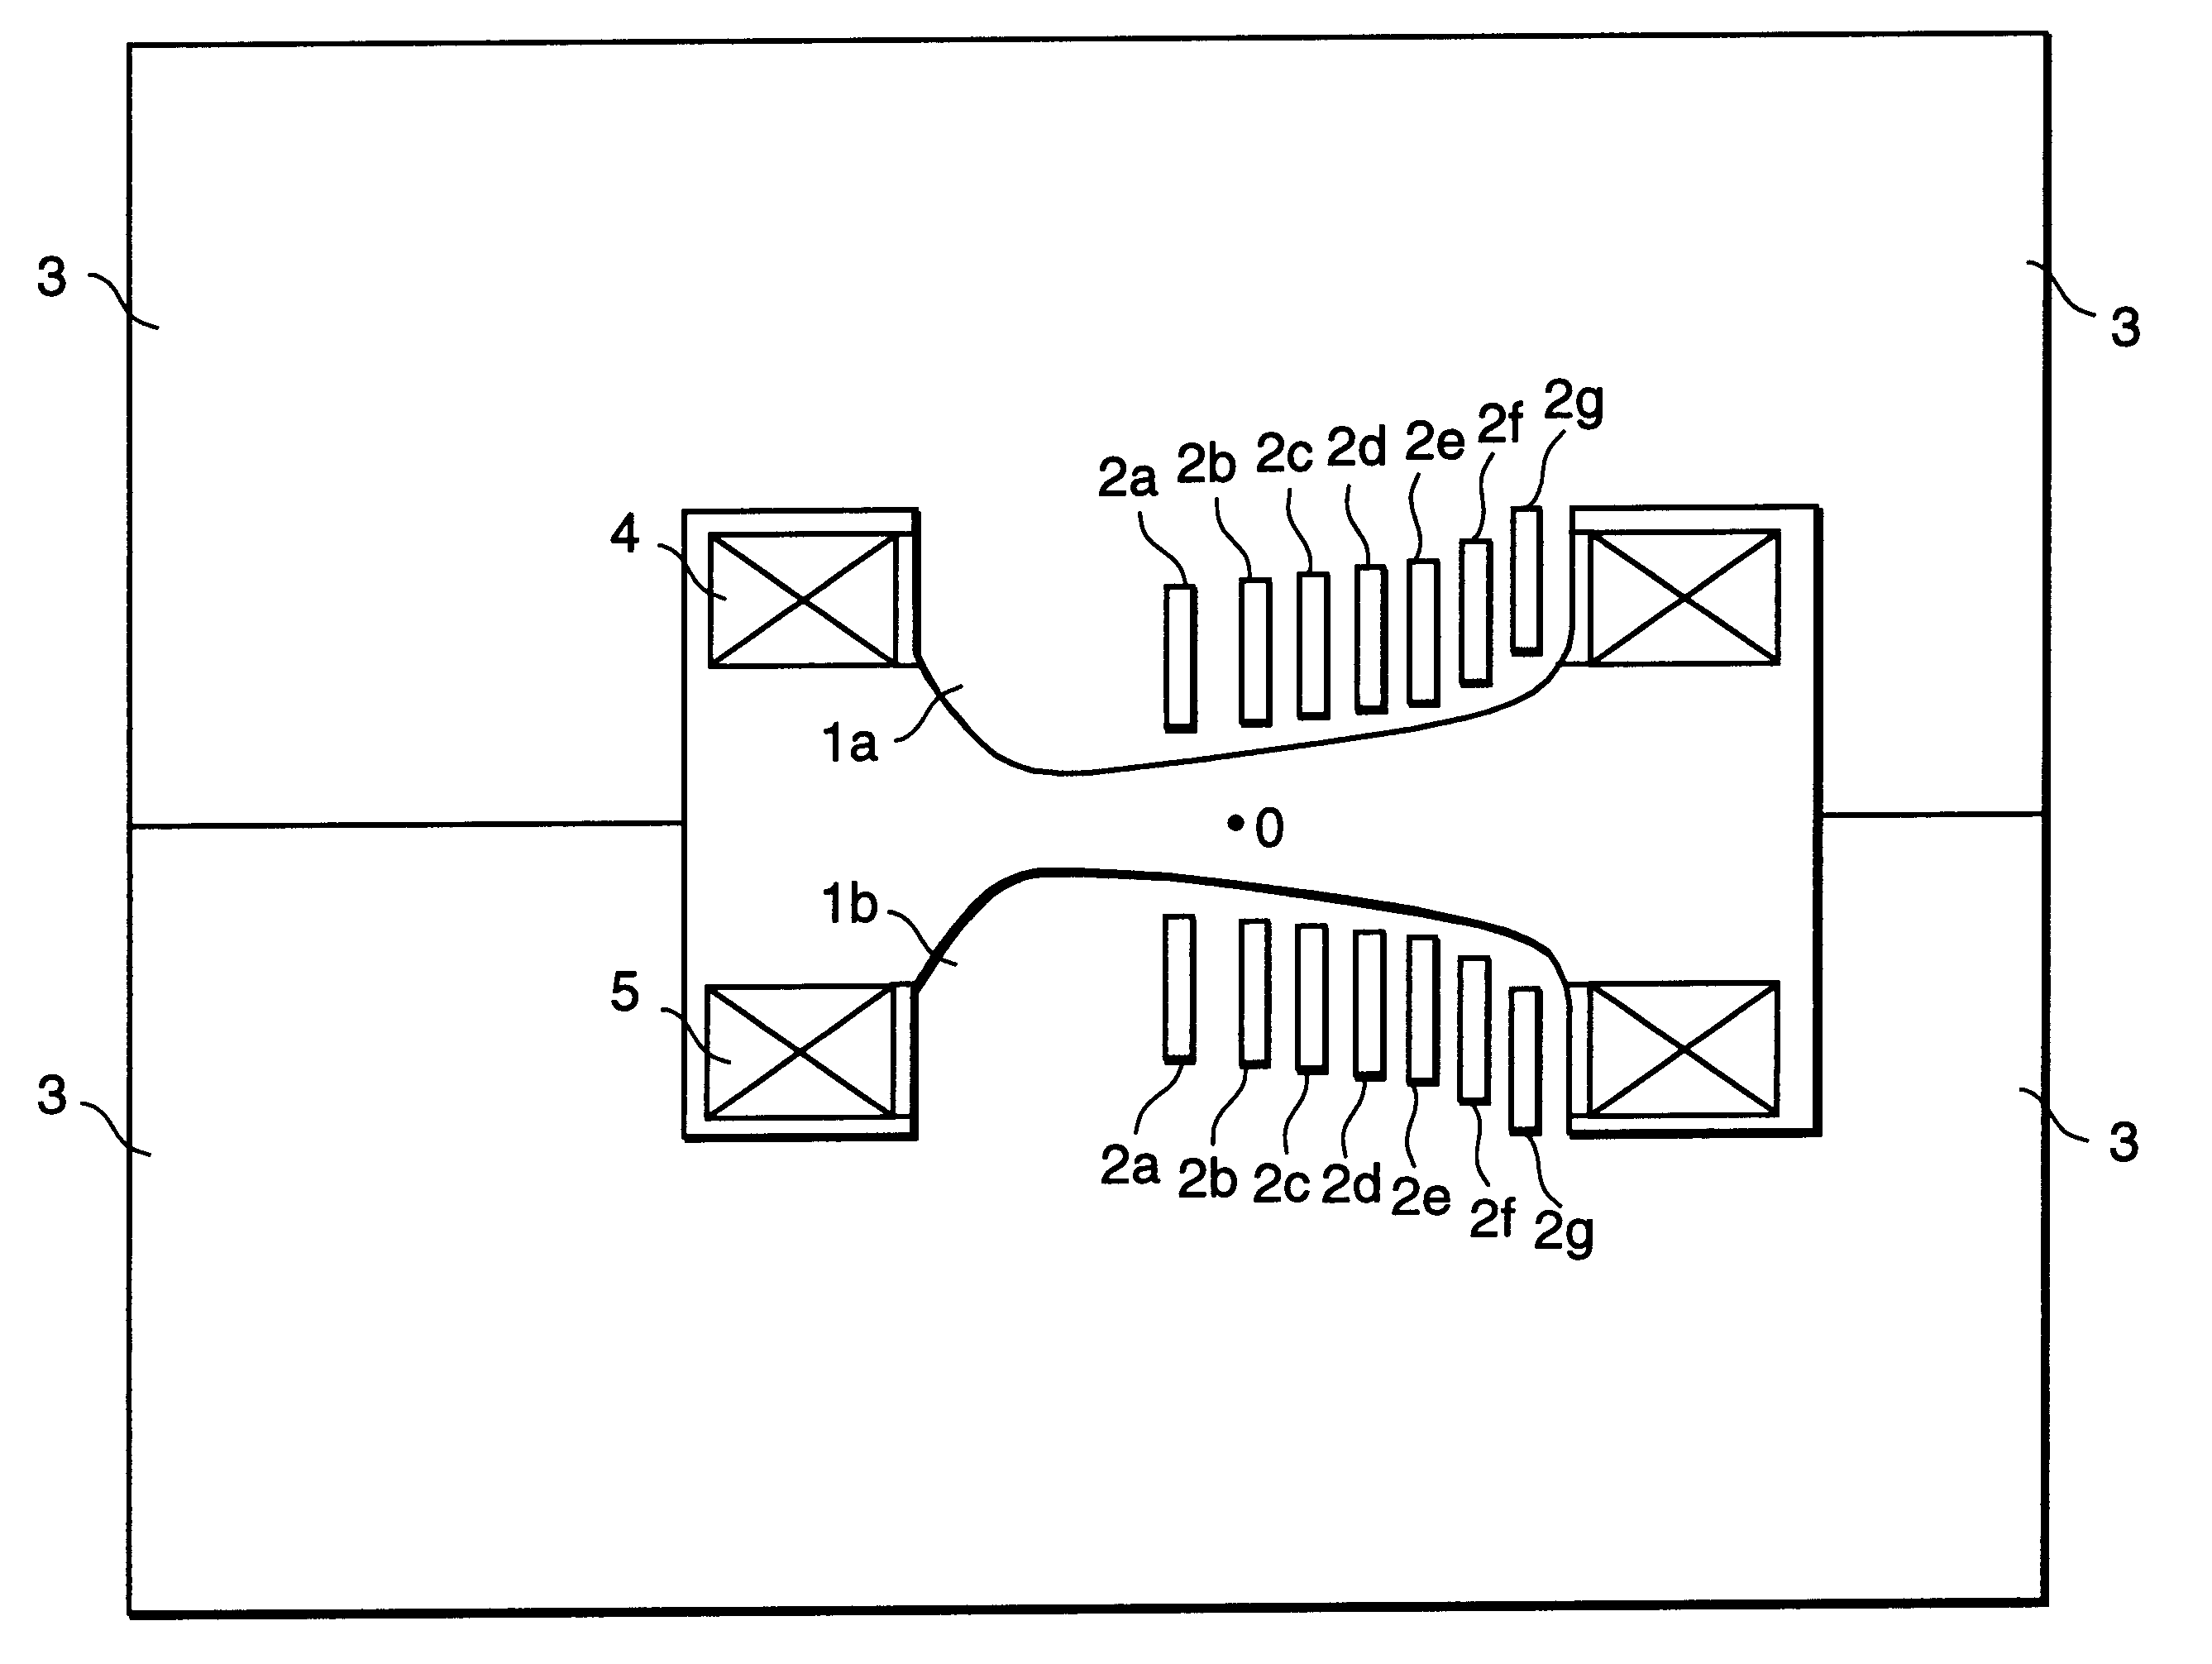 Electromagnet and magnetic field generating apparatus